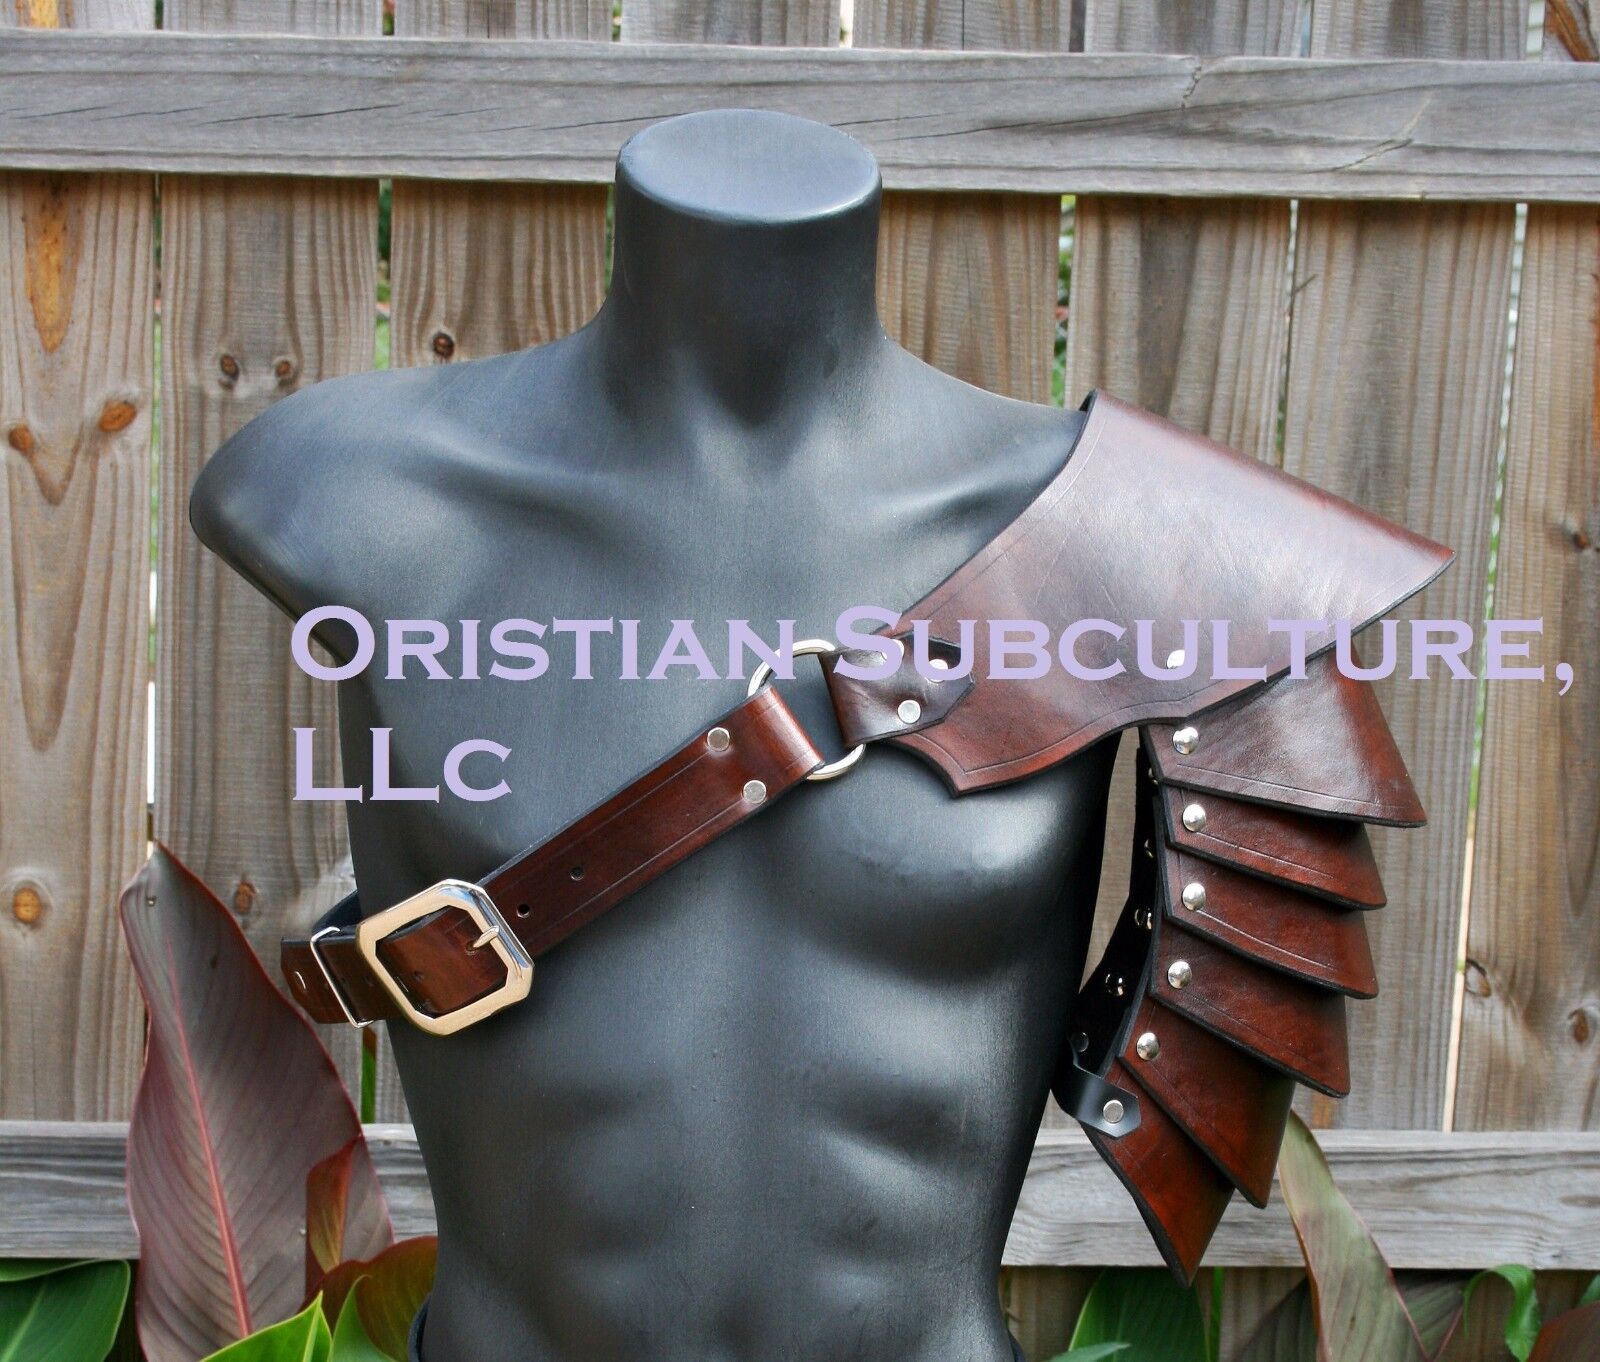 Single Leather Basic Rounded Spaulder Armor Ren SCA articulated pauldron cosplay